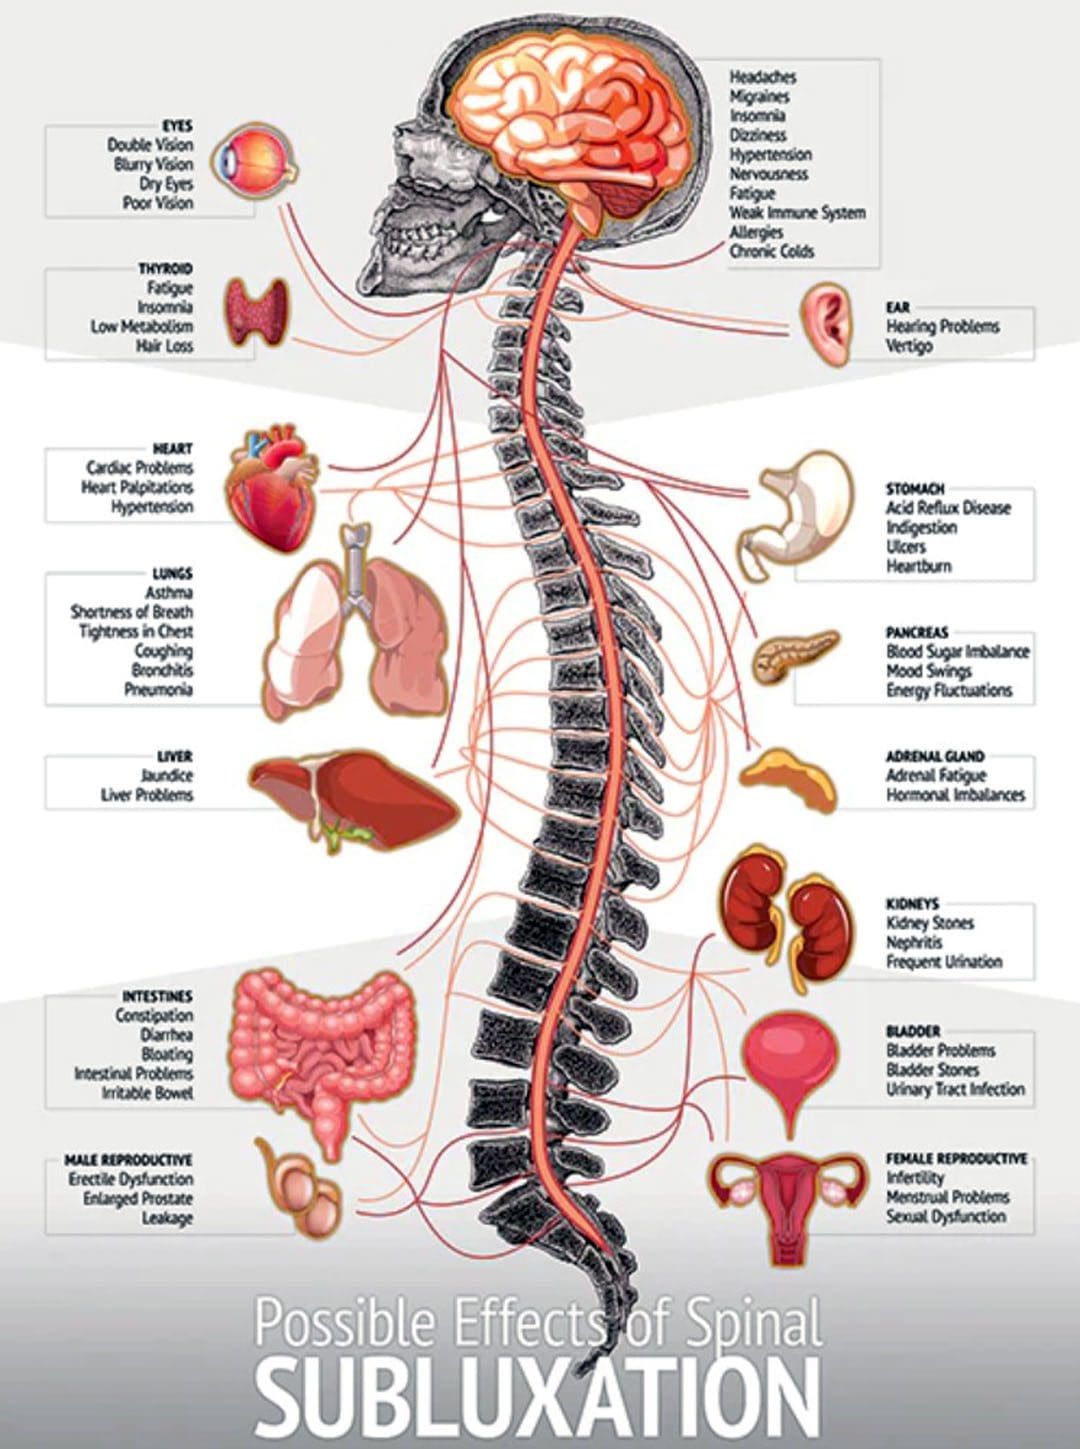 Body Misalignment Digestive Problems: EP Chiropractic Clinic